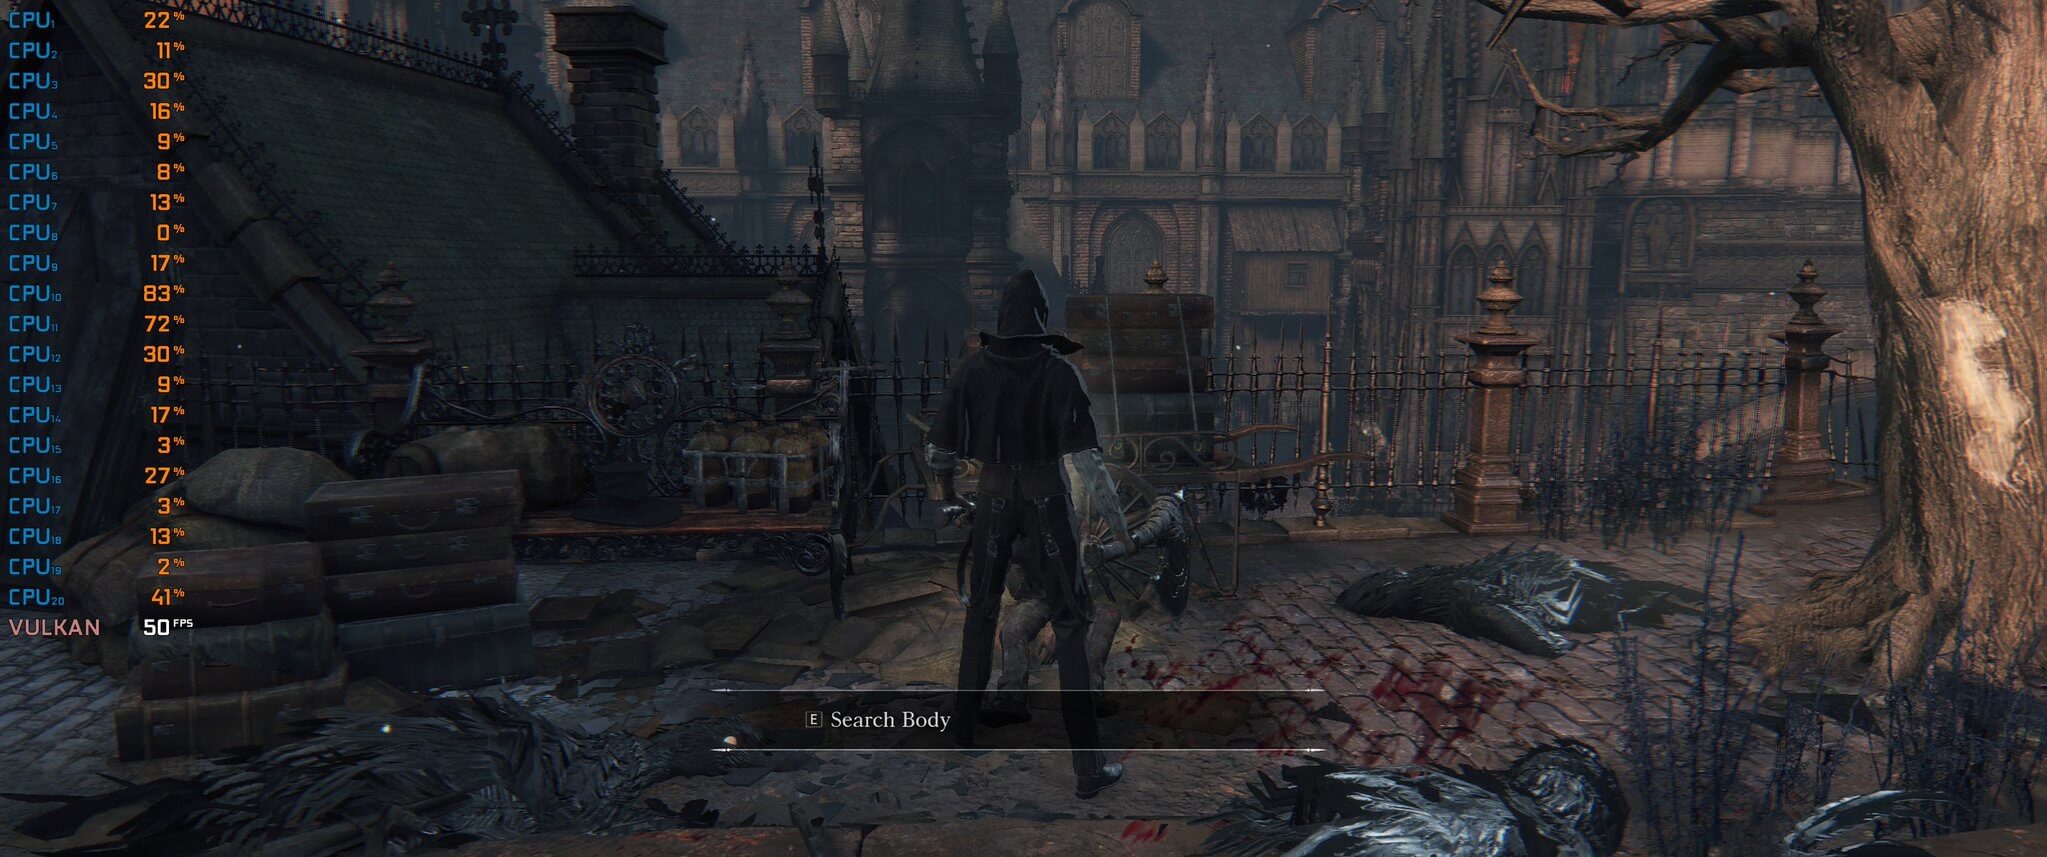 from software on bloodborne pc release